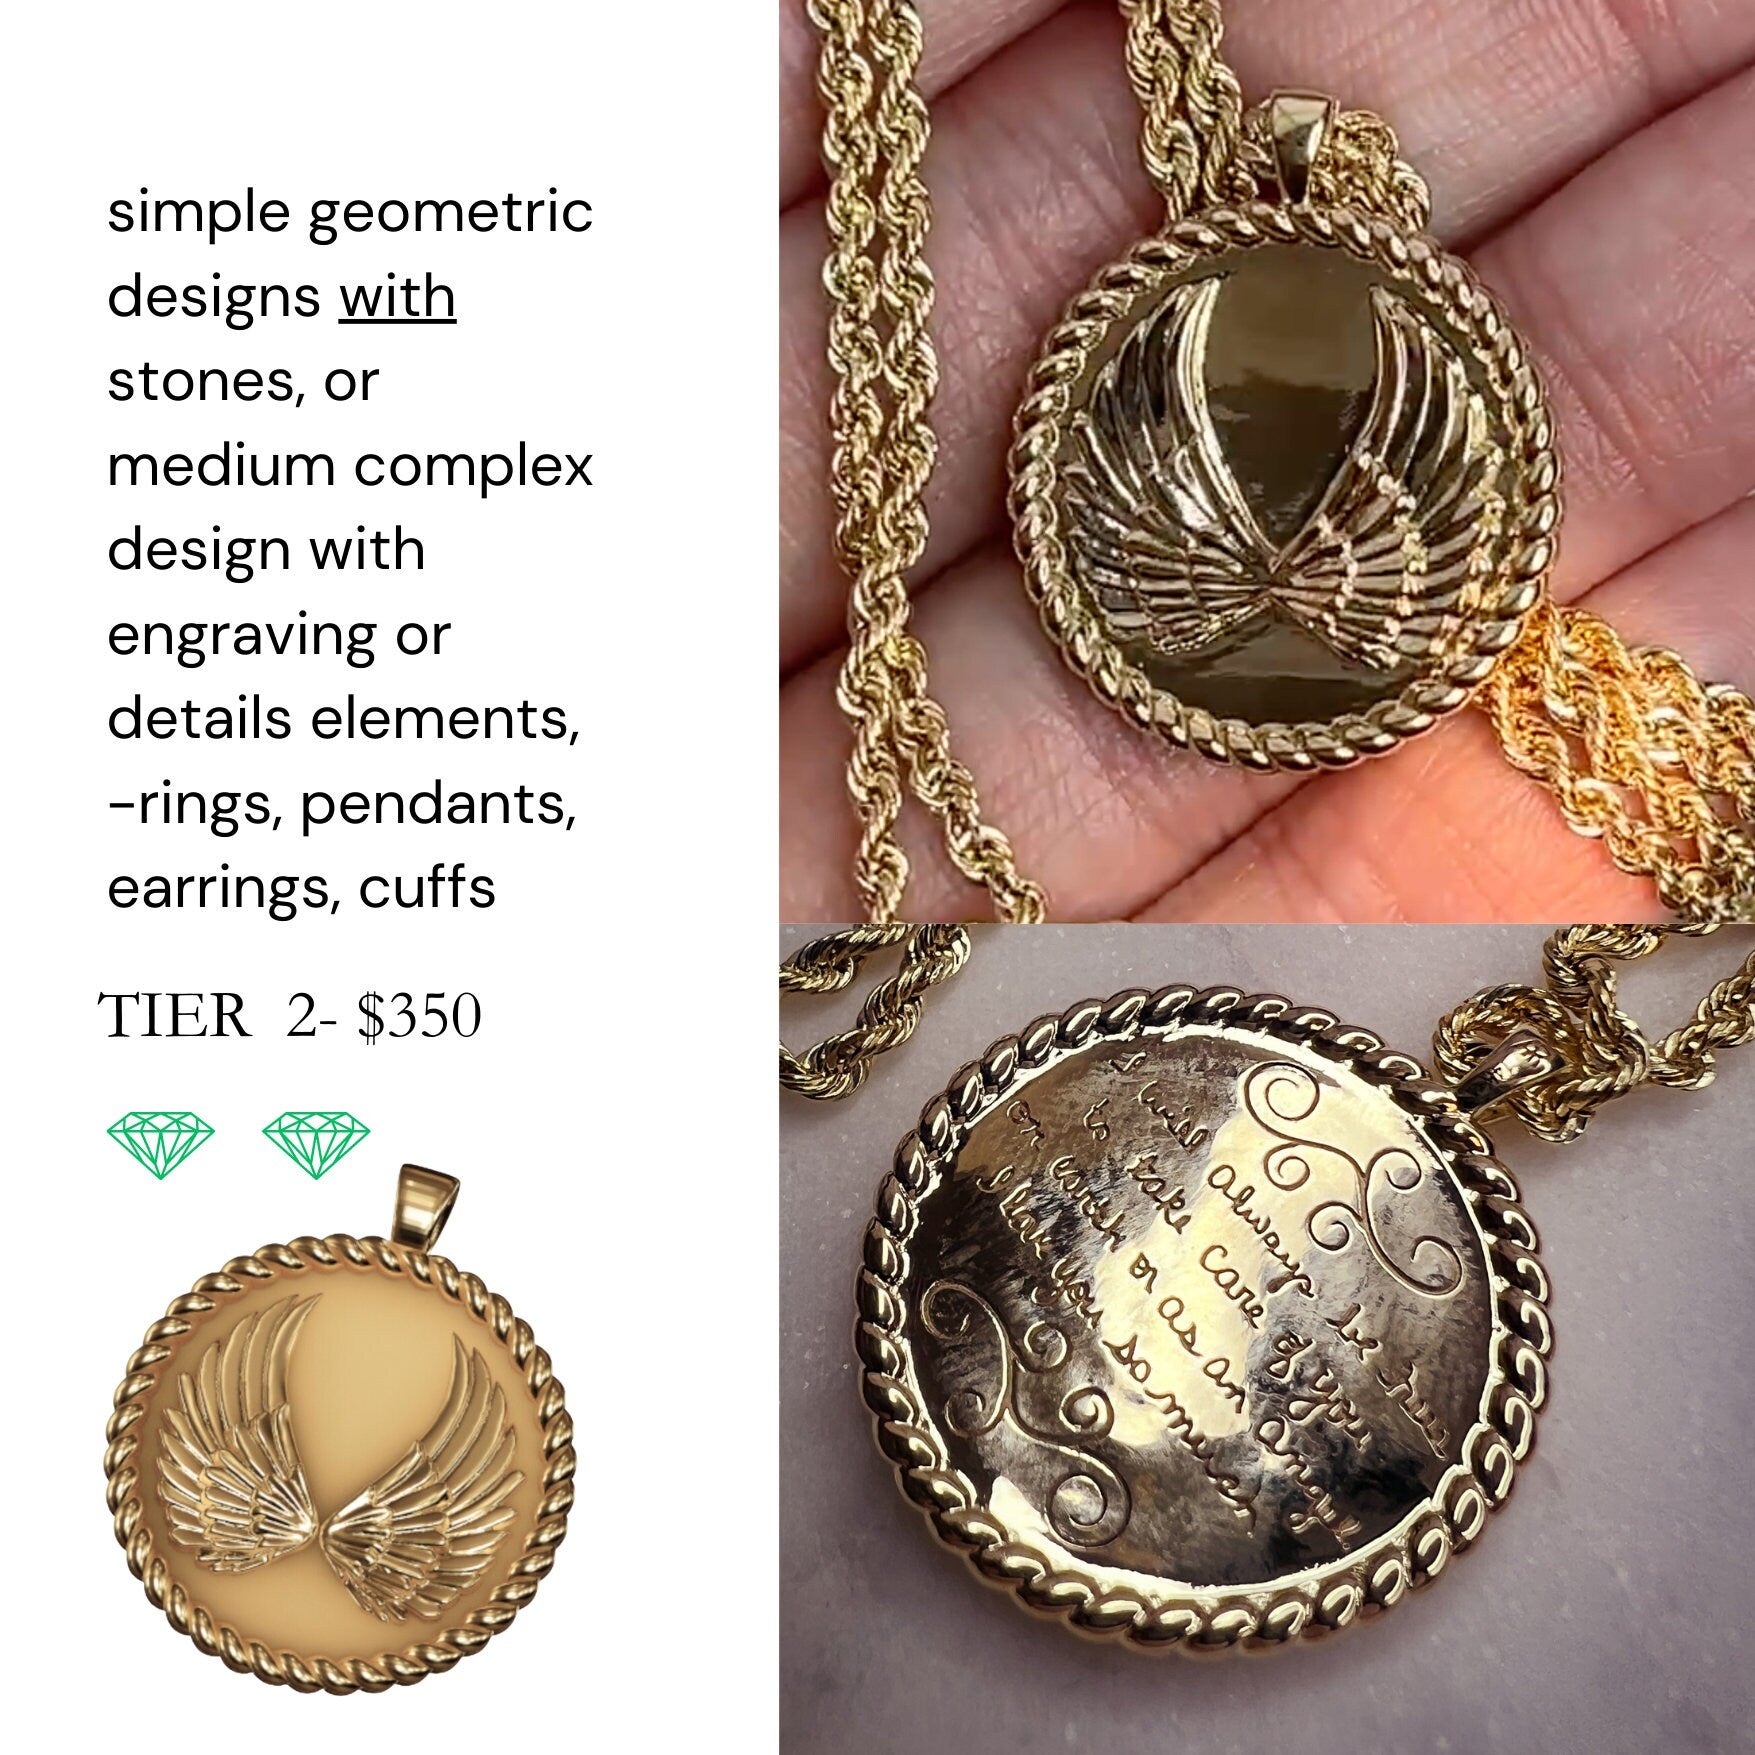 Create your own 3D printed Jewelry